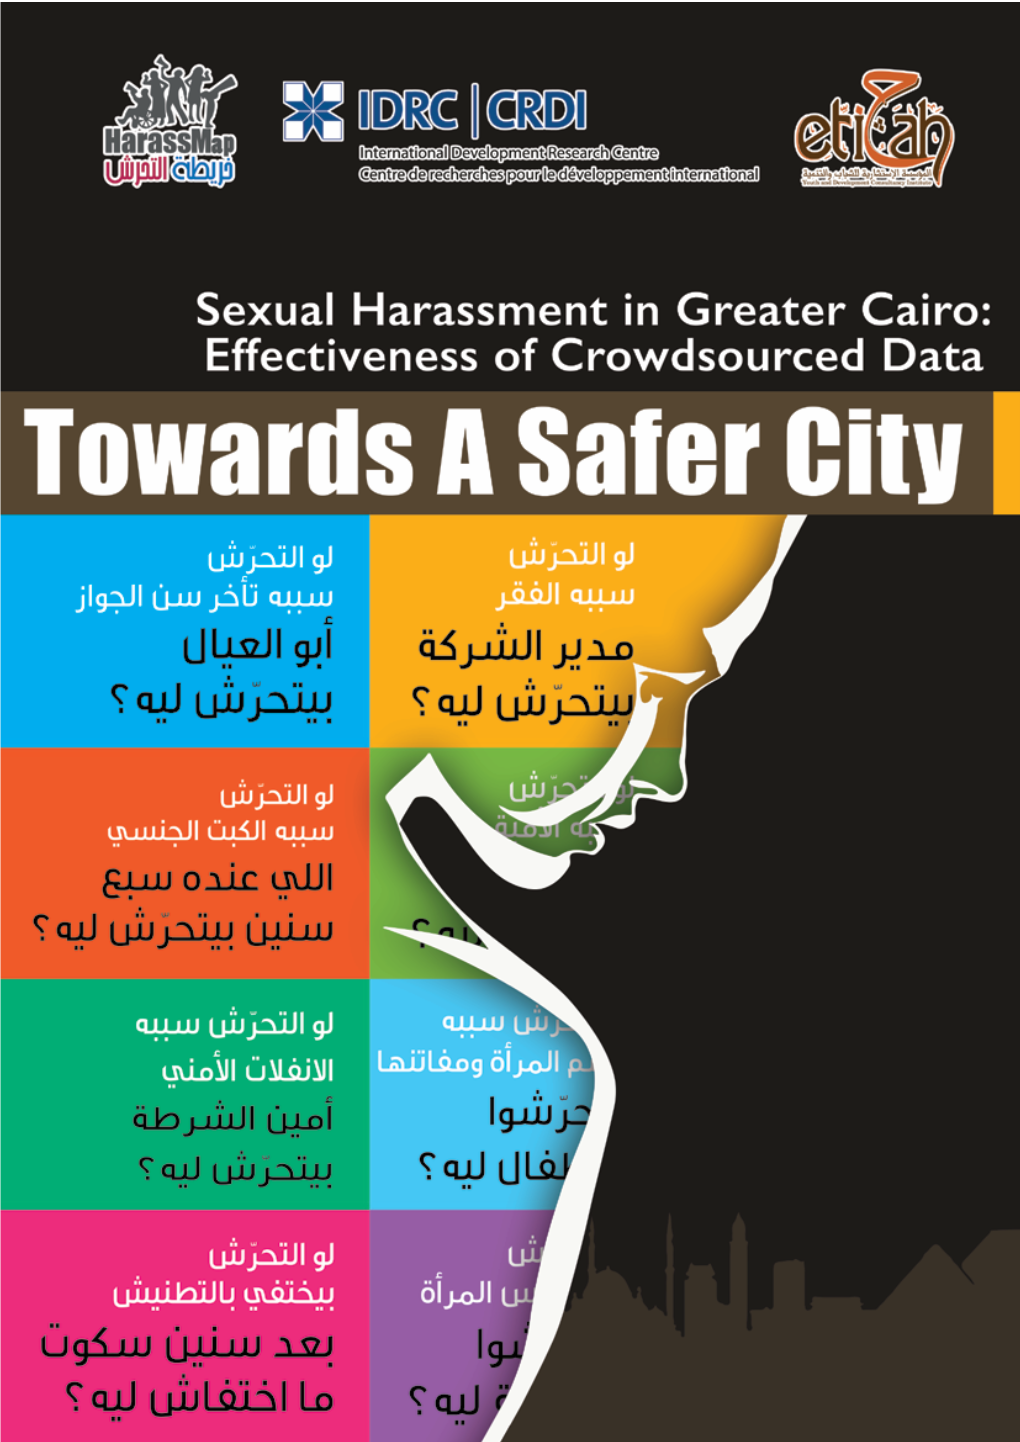 Towards a Safer City – Sexual Harassment in Greater Cairo